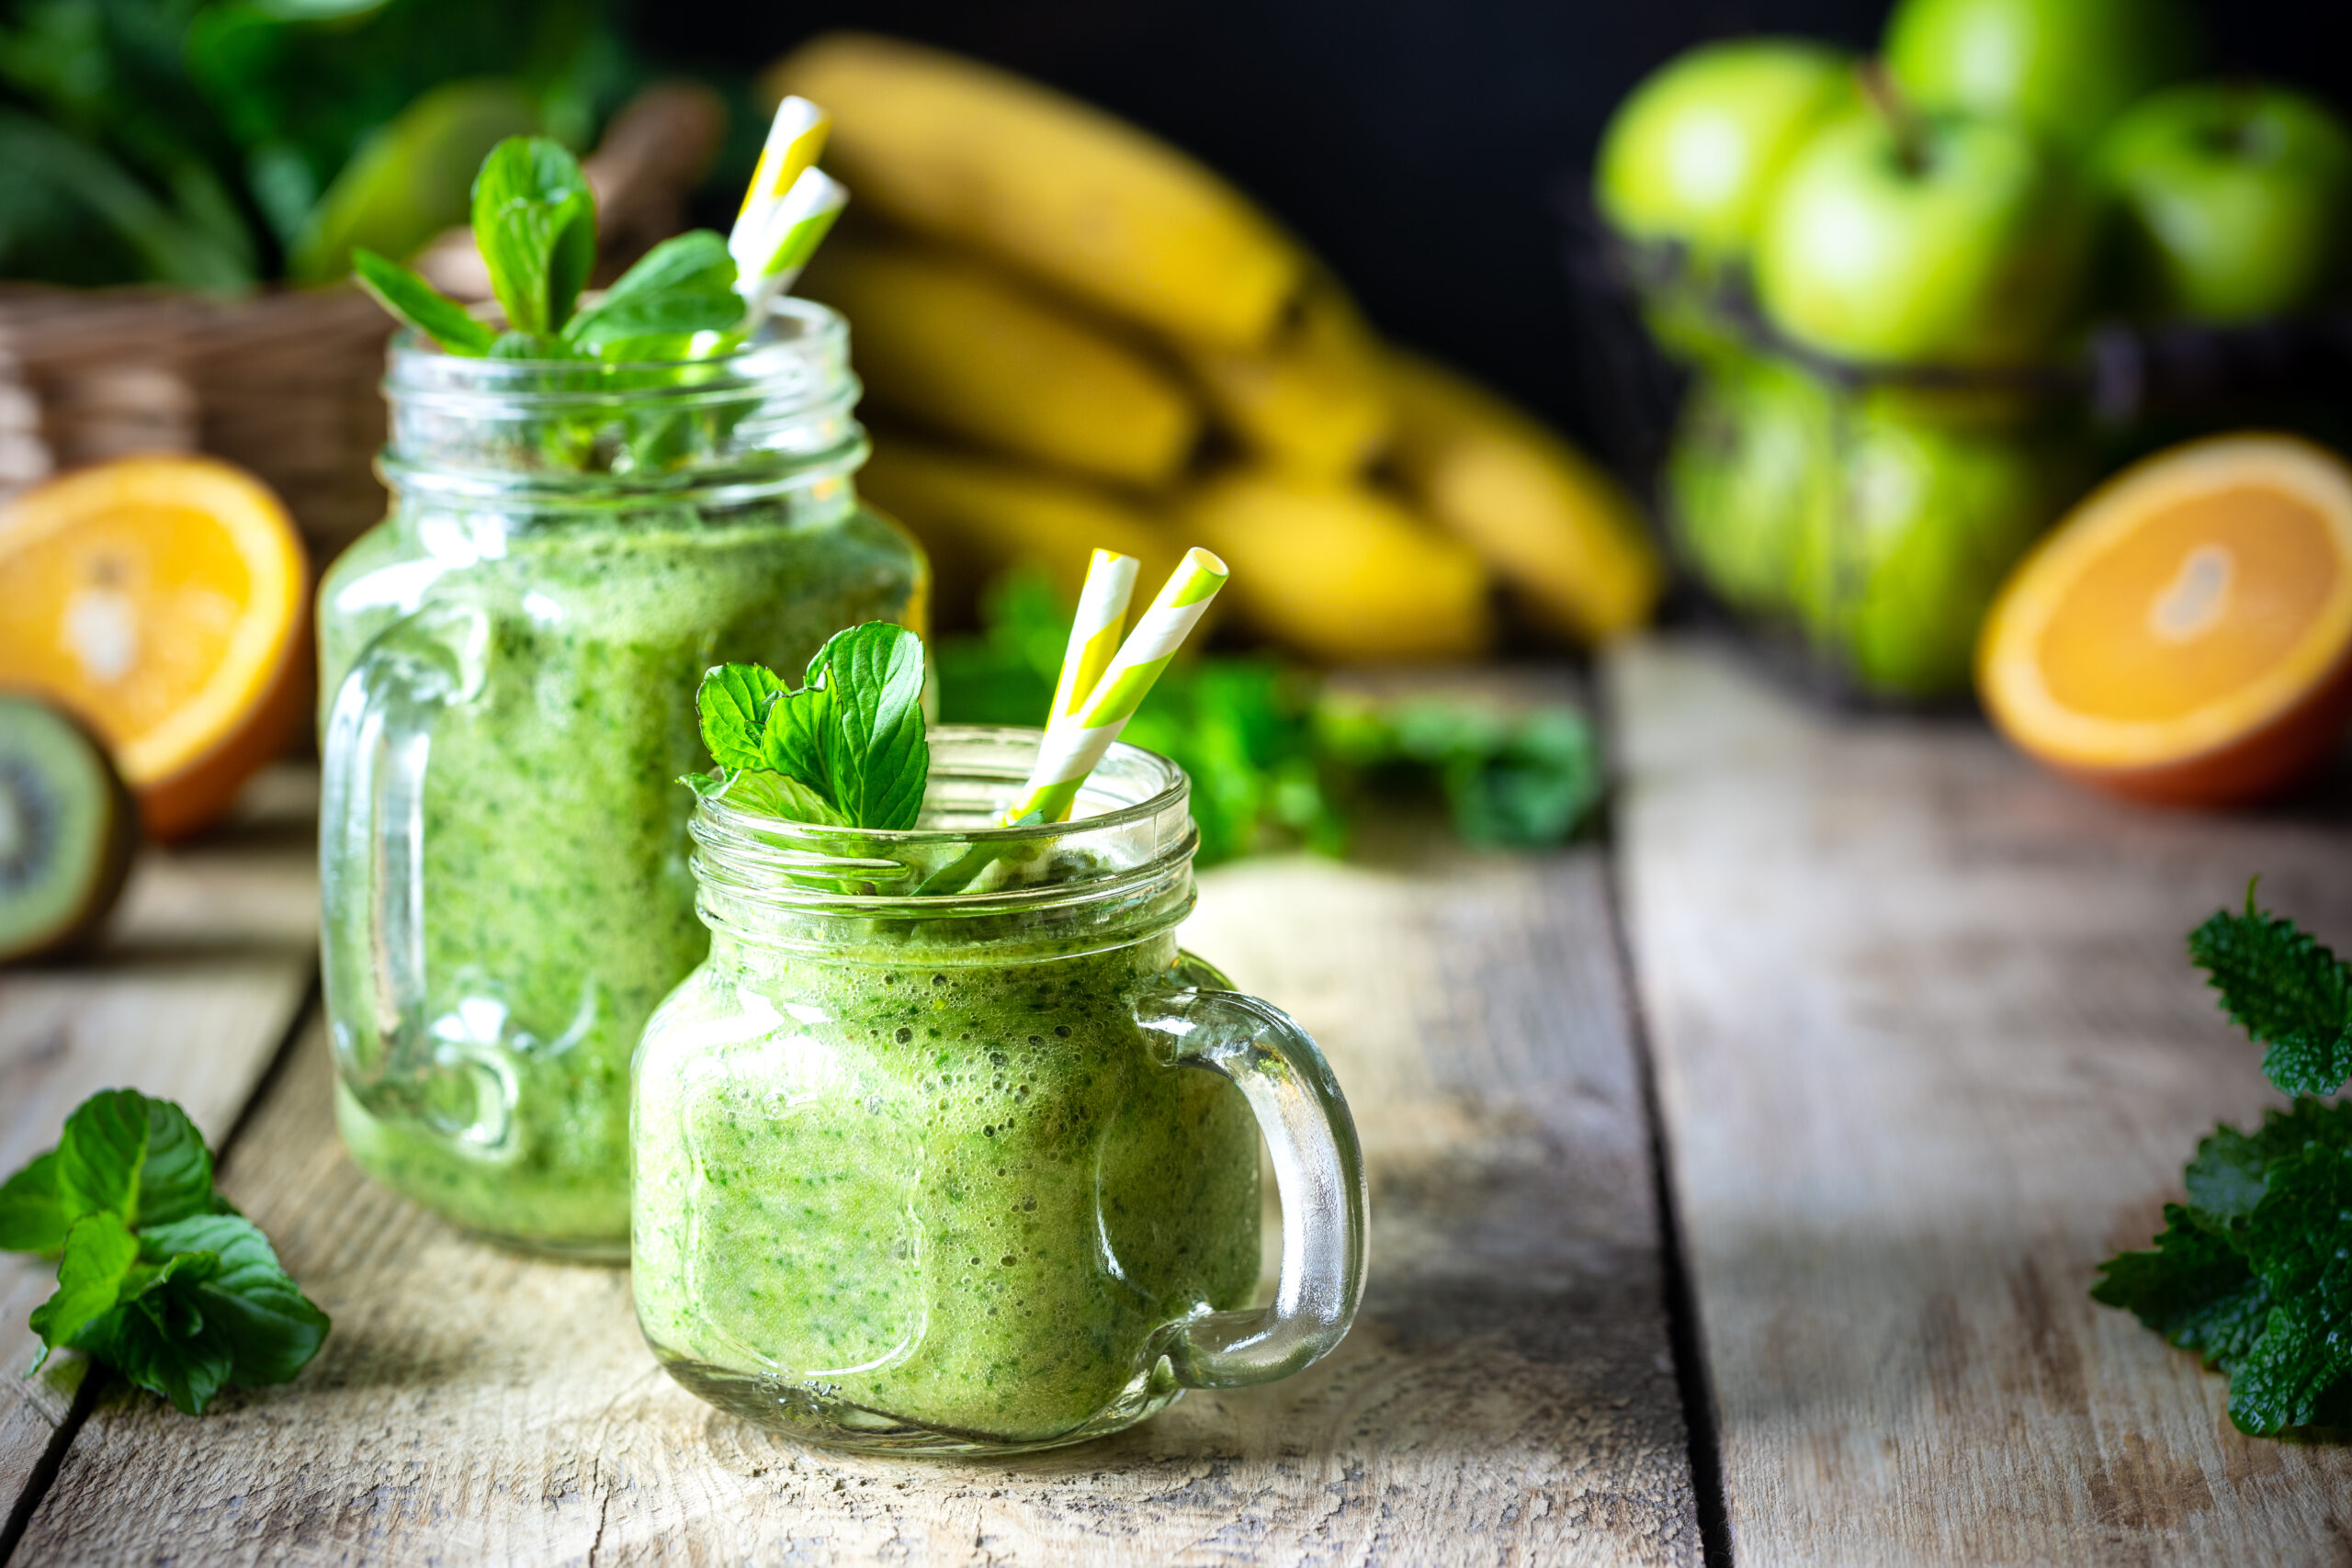 Two healthy green smoothies with spinach, banana, apple, kiwi and mint in glass jar and ingredients. Detox, diet, healthy, vegetarian food concept